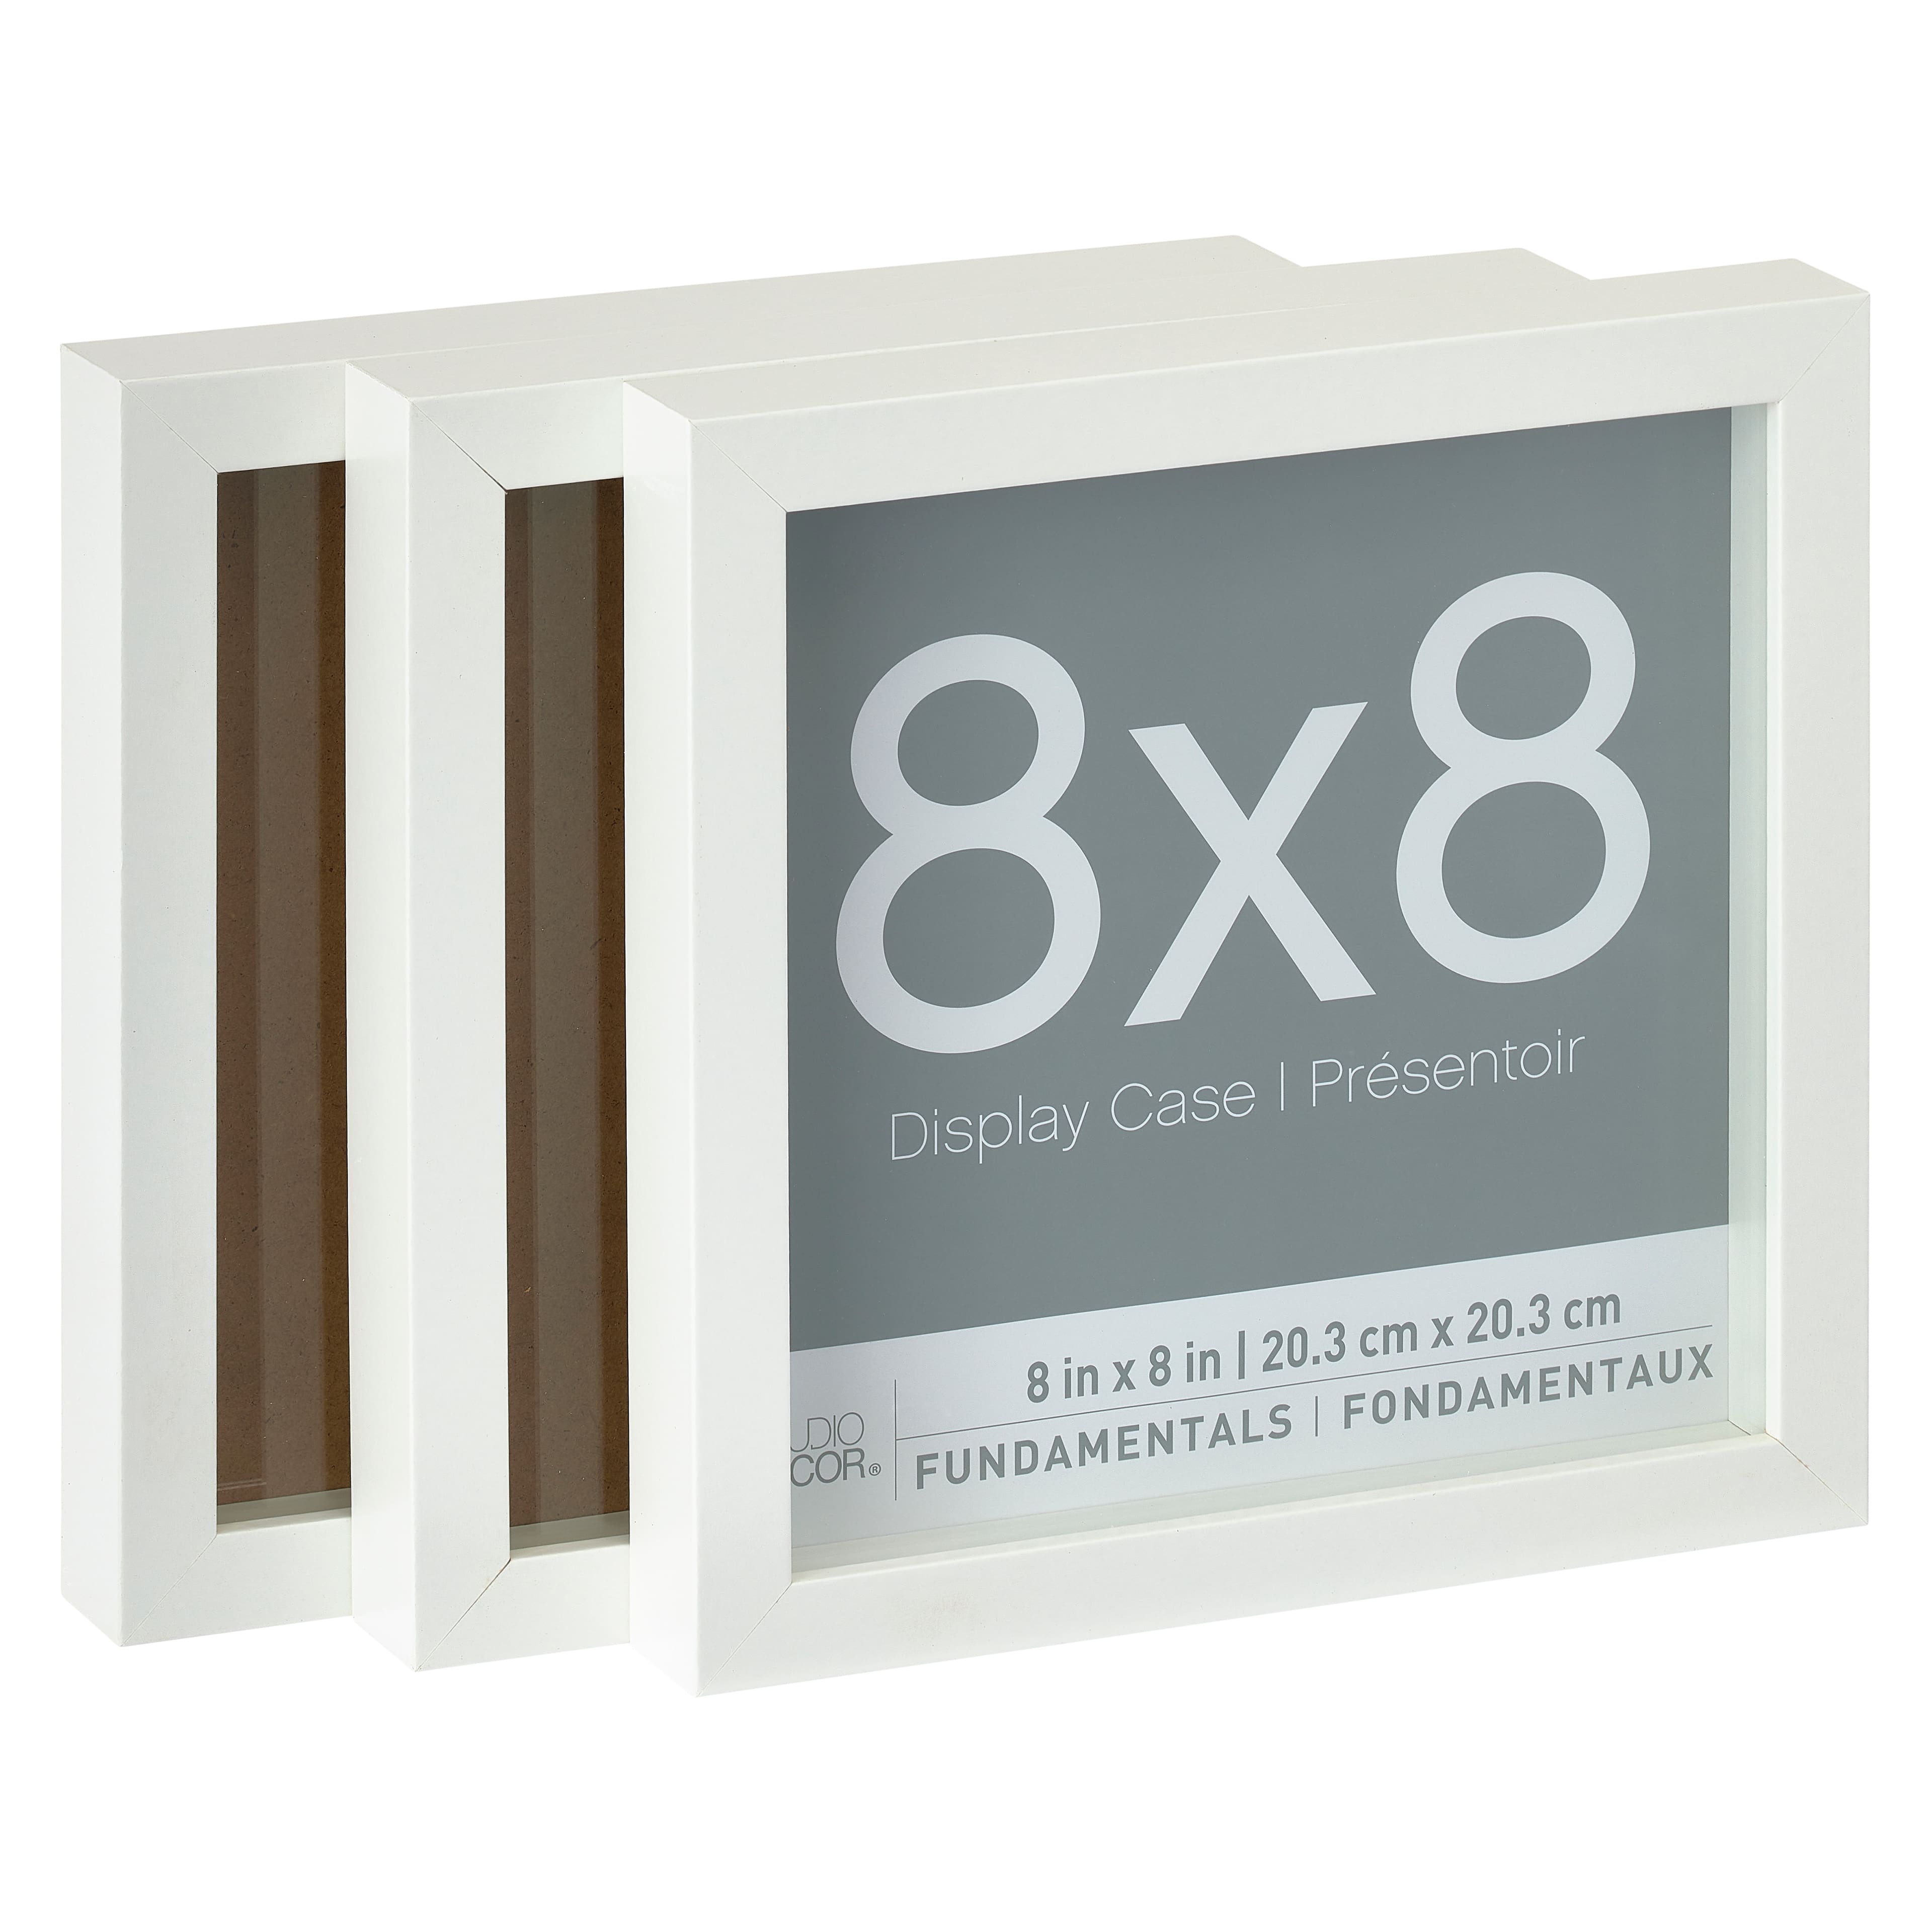 8 1/2 x 11 Paper - Silver Metallic (50 Qty.) : : Office Products